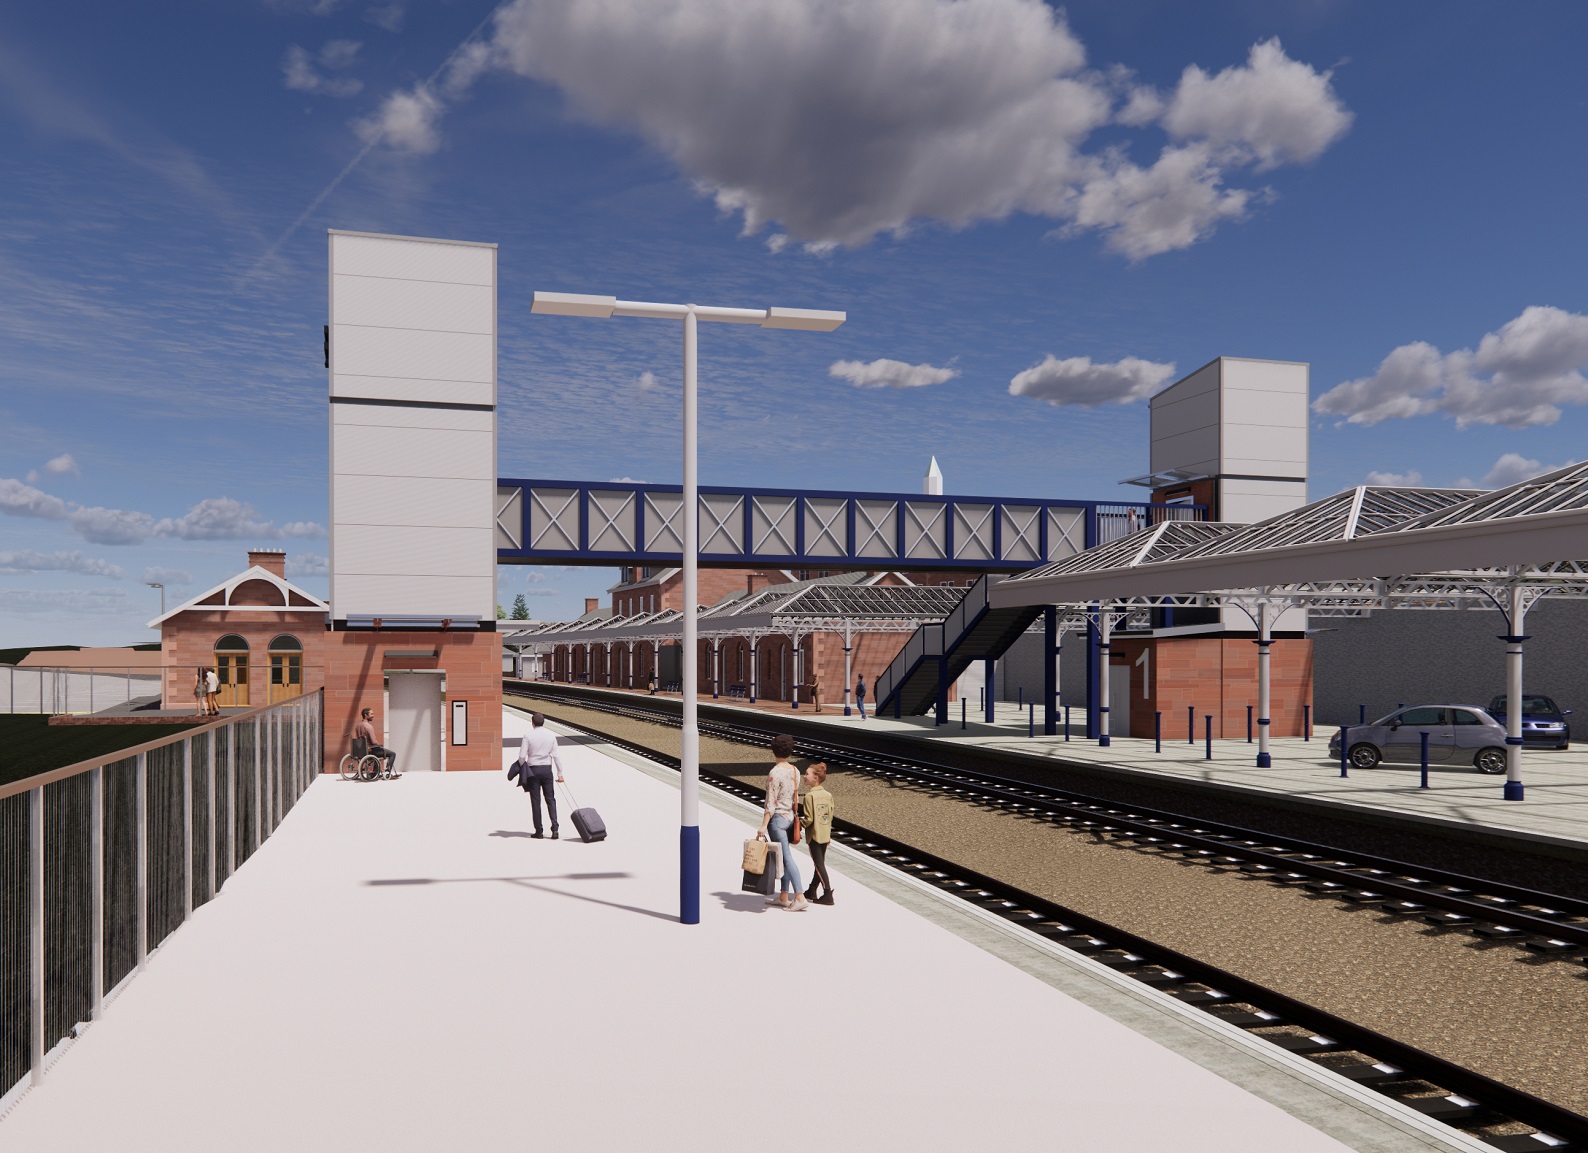 Plans submitted for new Dumfries station bridge